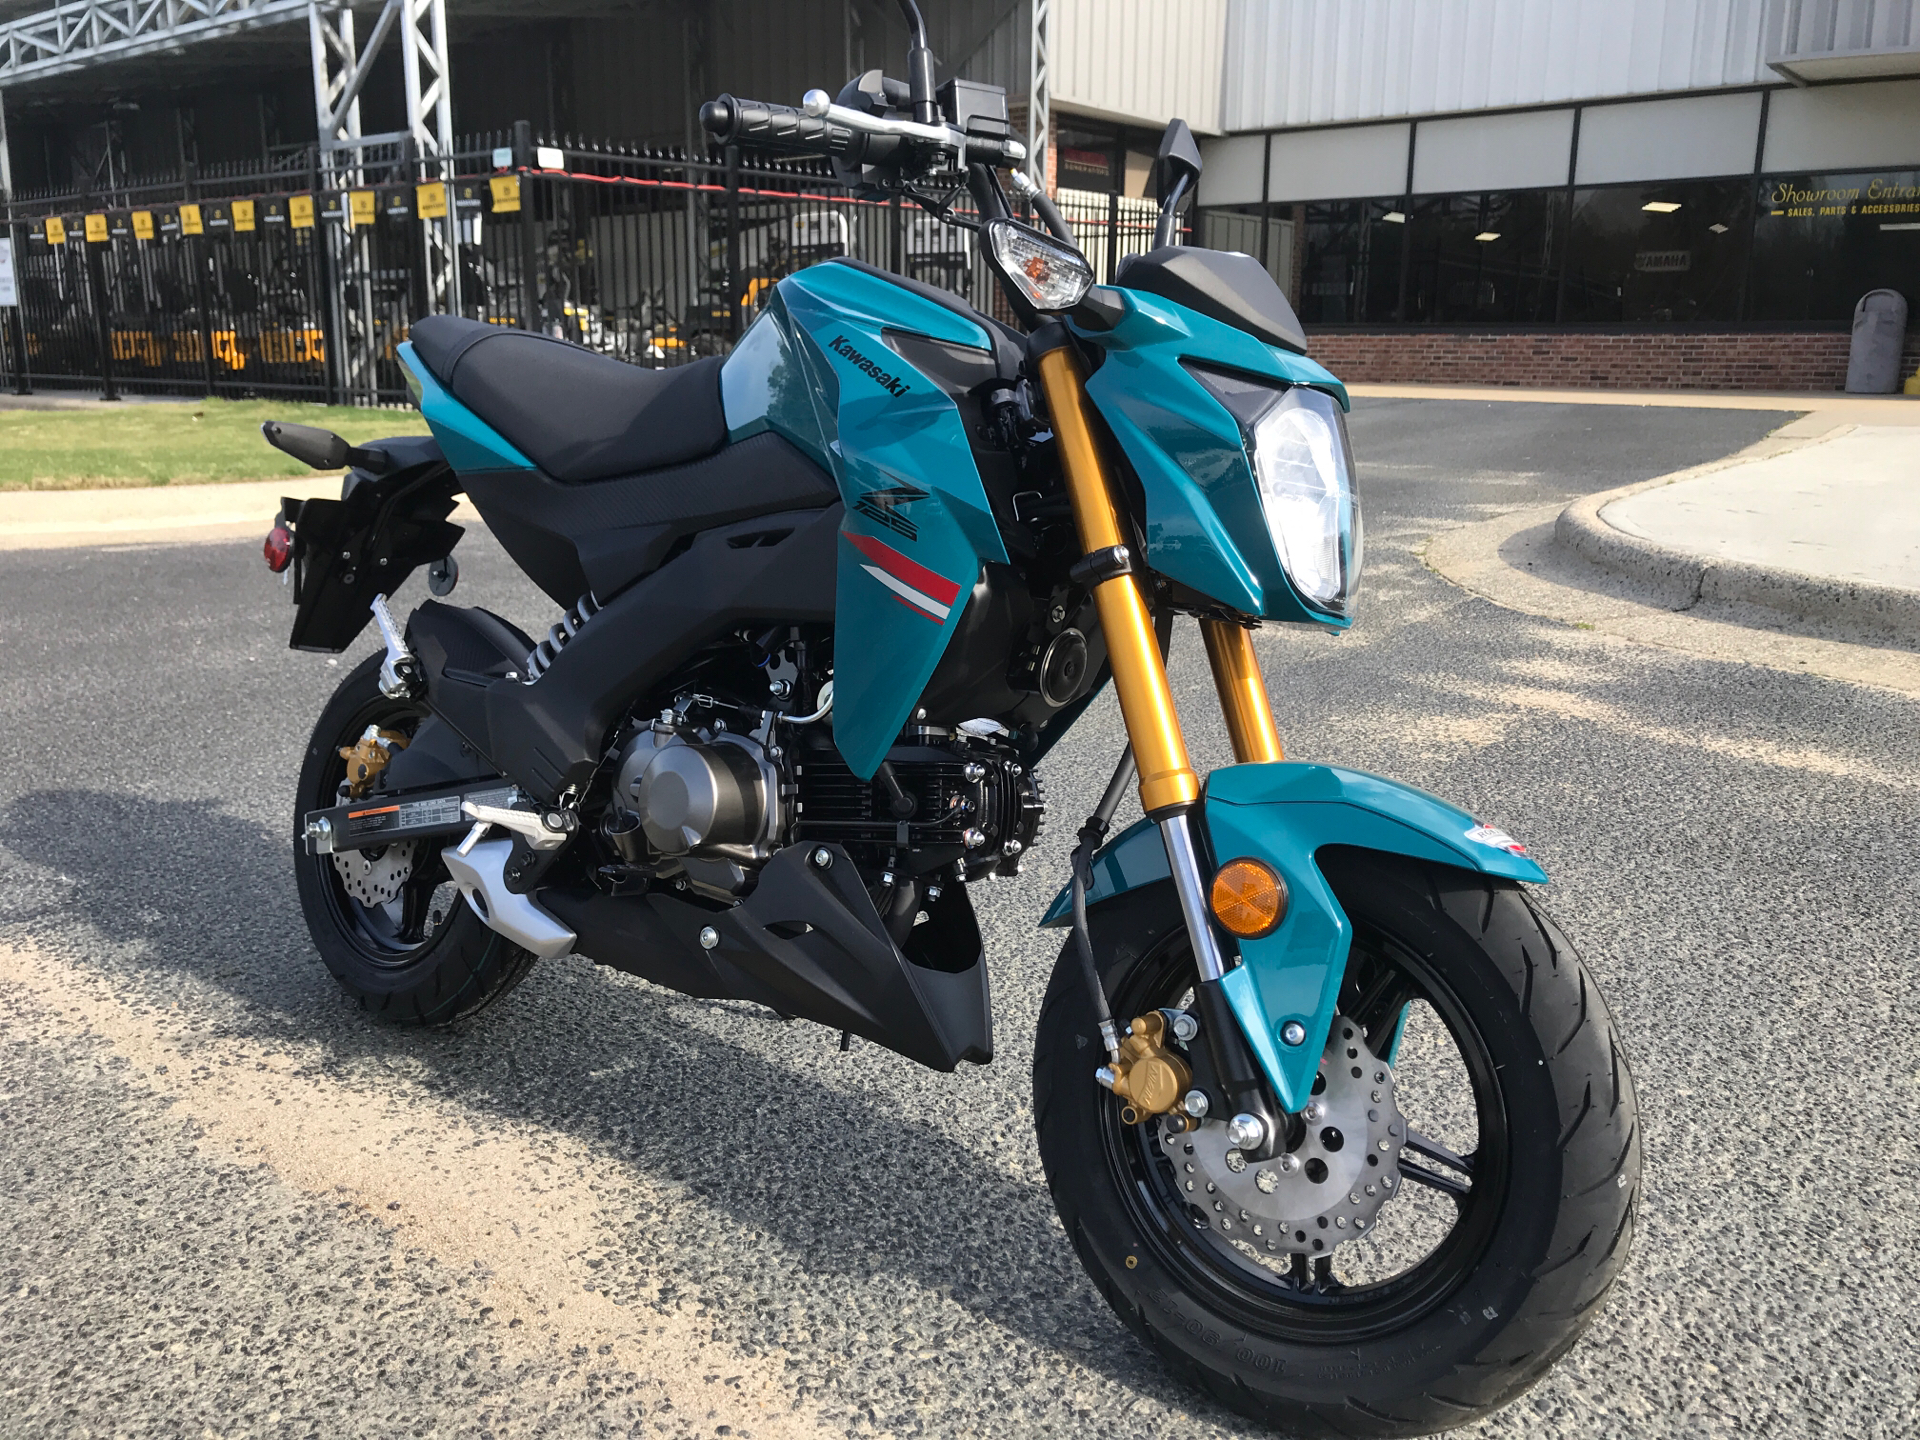 New 2021 Kawasaki Z125 Pro Motorcycles in Greenville, NC | Stock Number: N/A